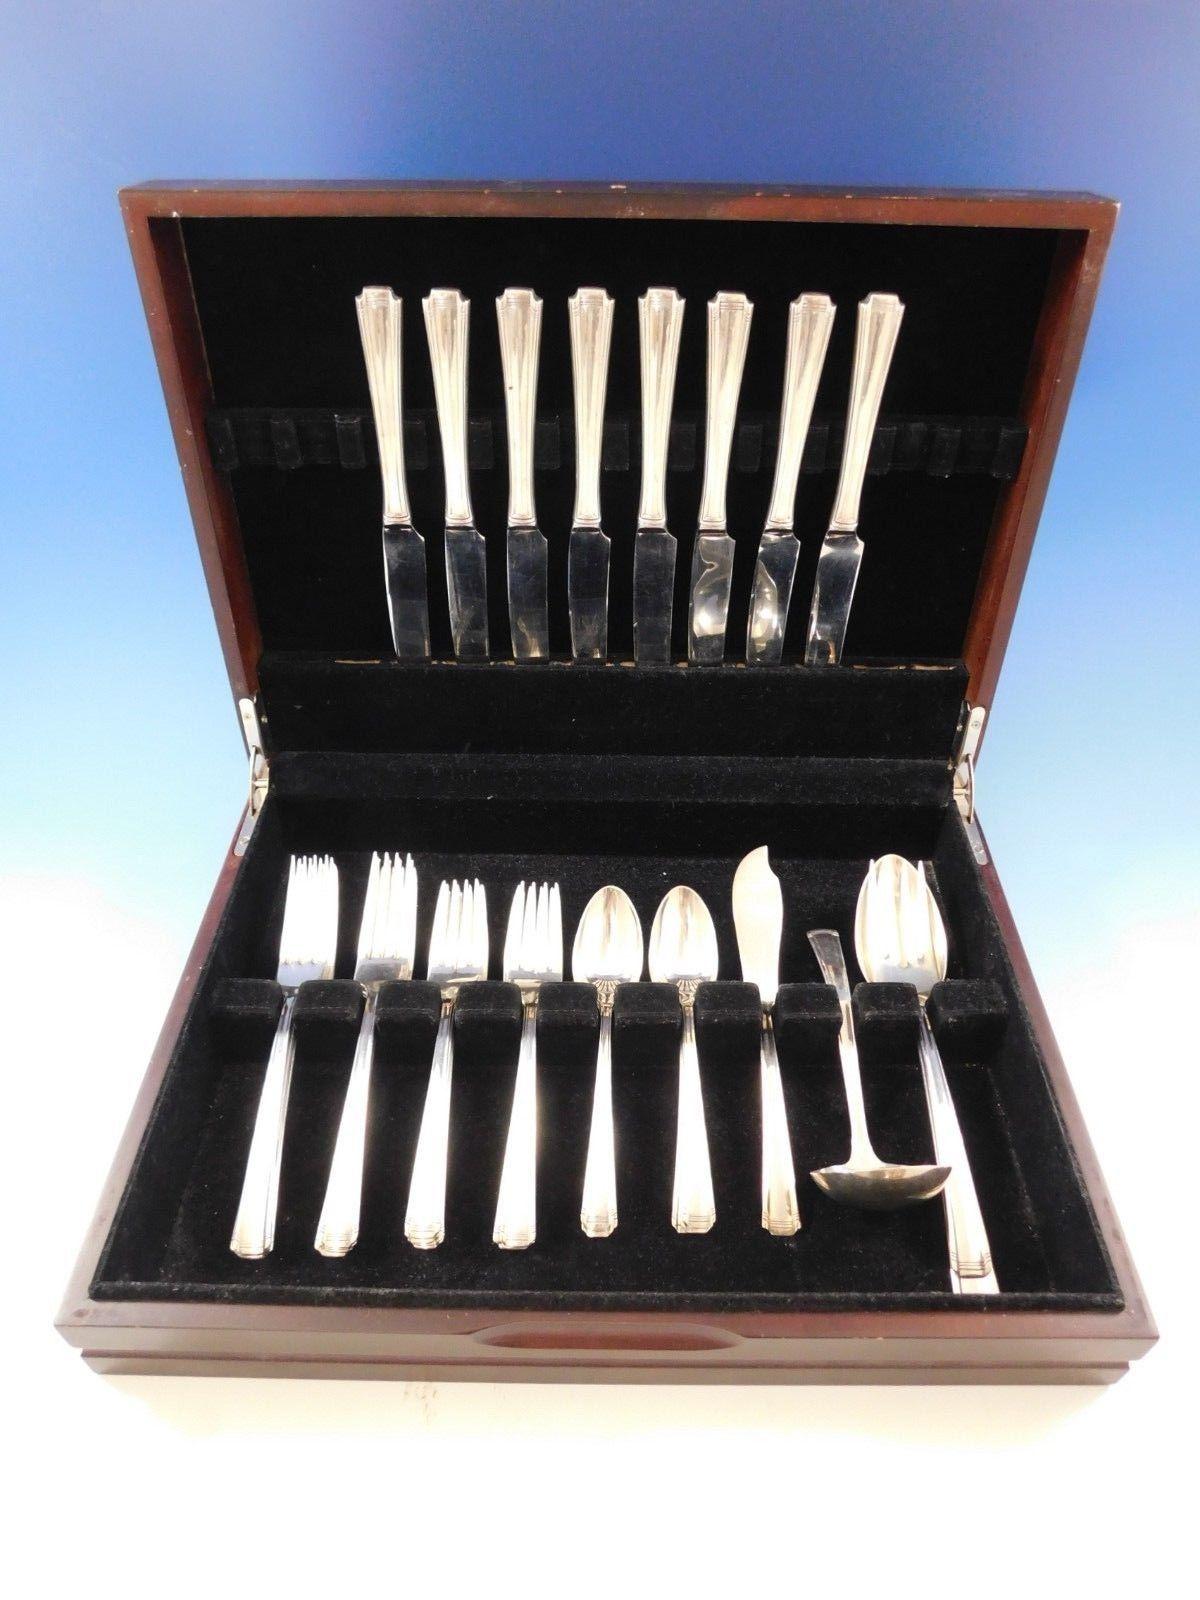 John and Priscilla by Westmorland silver flatware set, 36 pieces. This set includes:

Eight knives, 9